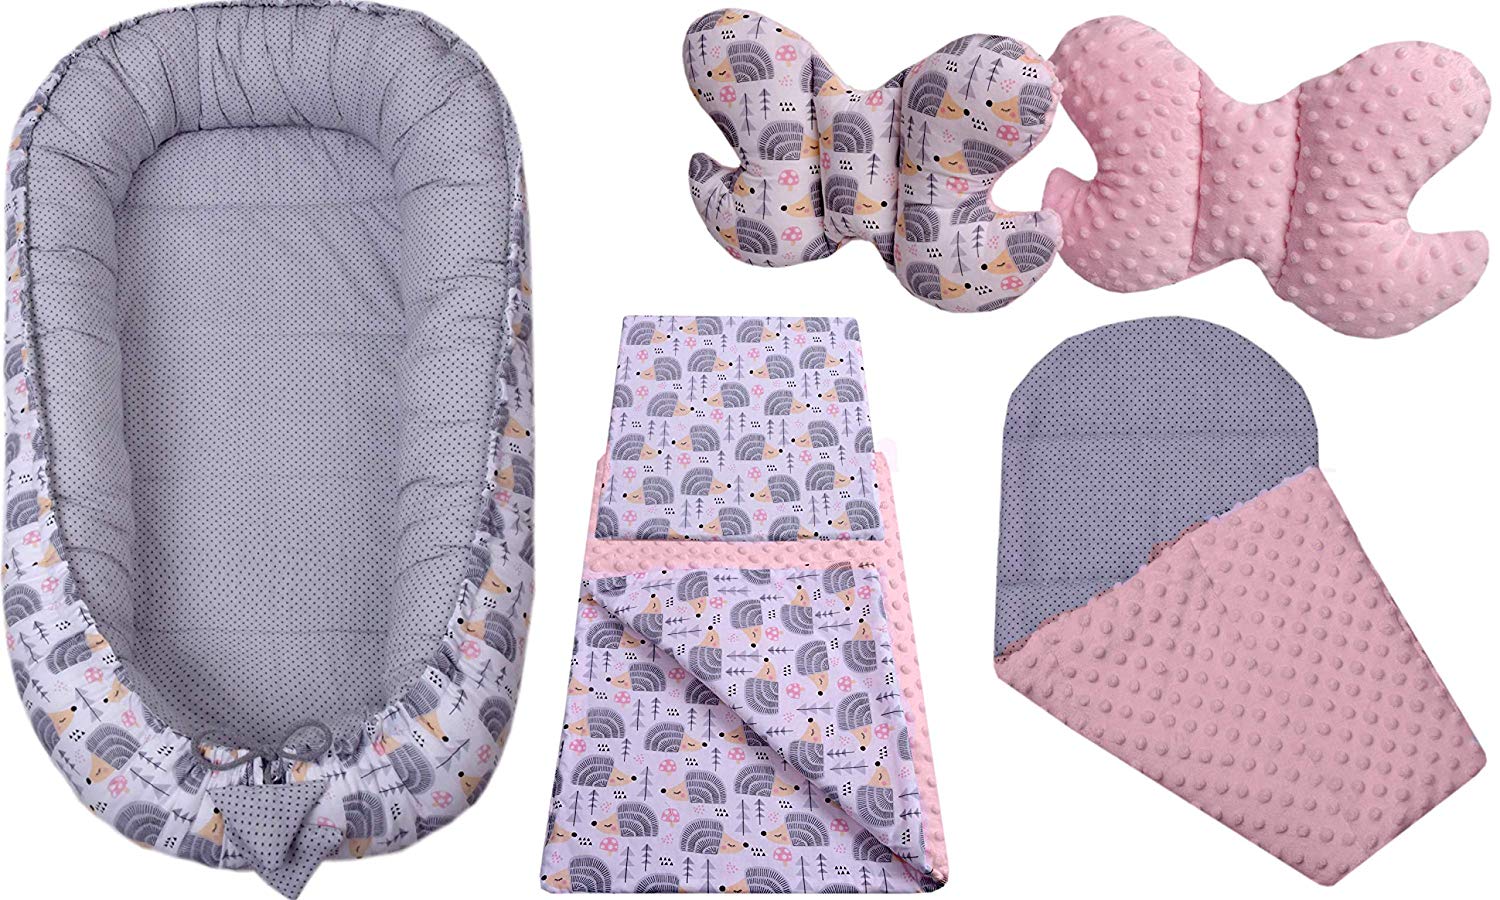 Medi Partners 5-Piece Baby Nest Set, 90 x 50 cm, Removable Insert Bed, Cuddly Nest, Crawling Blanket for Babies, Newborns, 100% Cotton (Grey Hedgehog with Light Pink Minky)